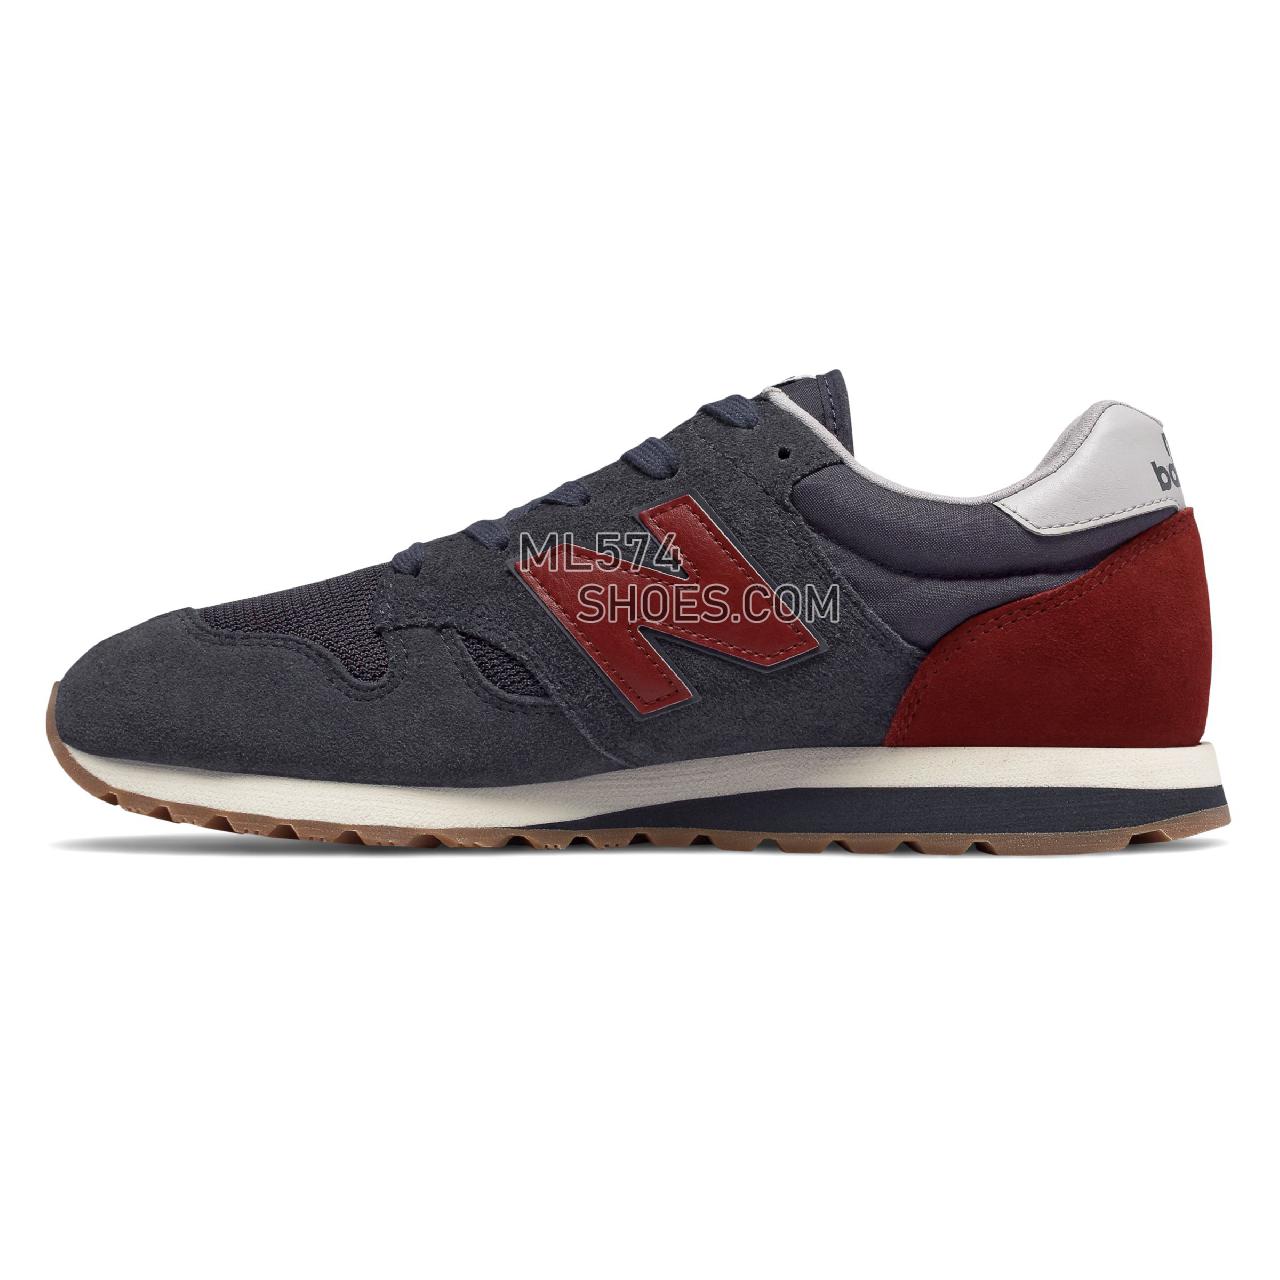 New Balance 520 - Unisex 520 - Classic Outerspace with Scarlet - U520EJ